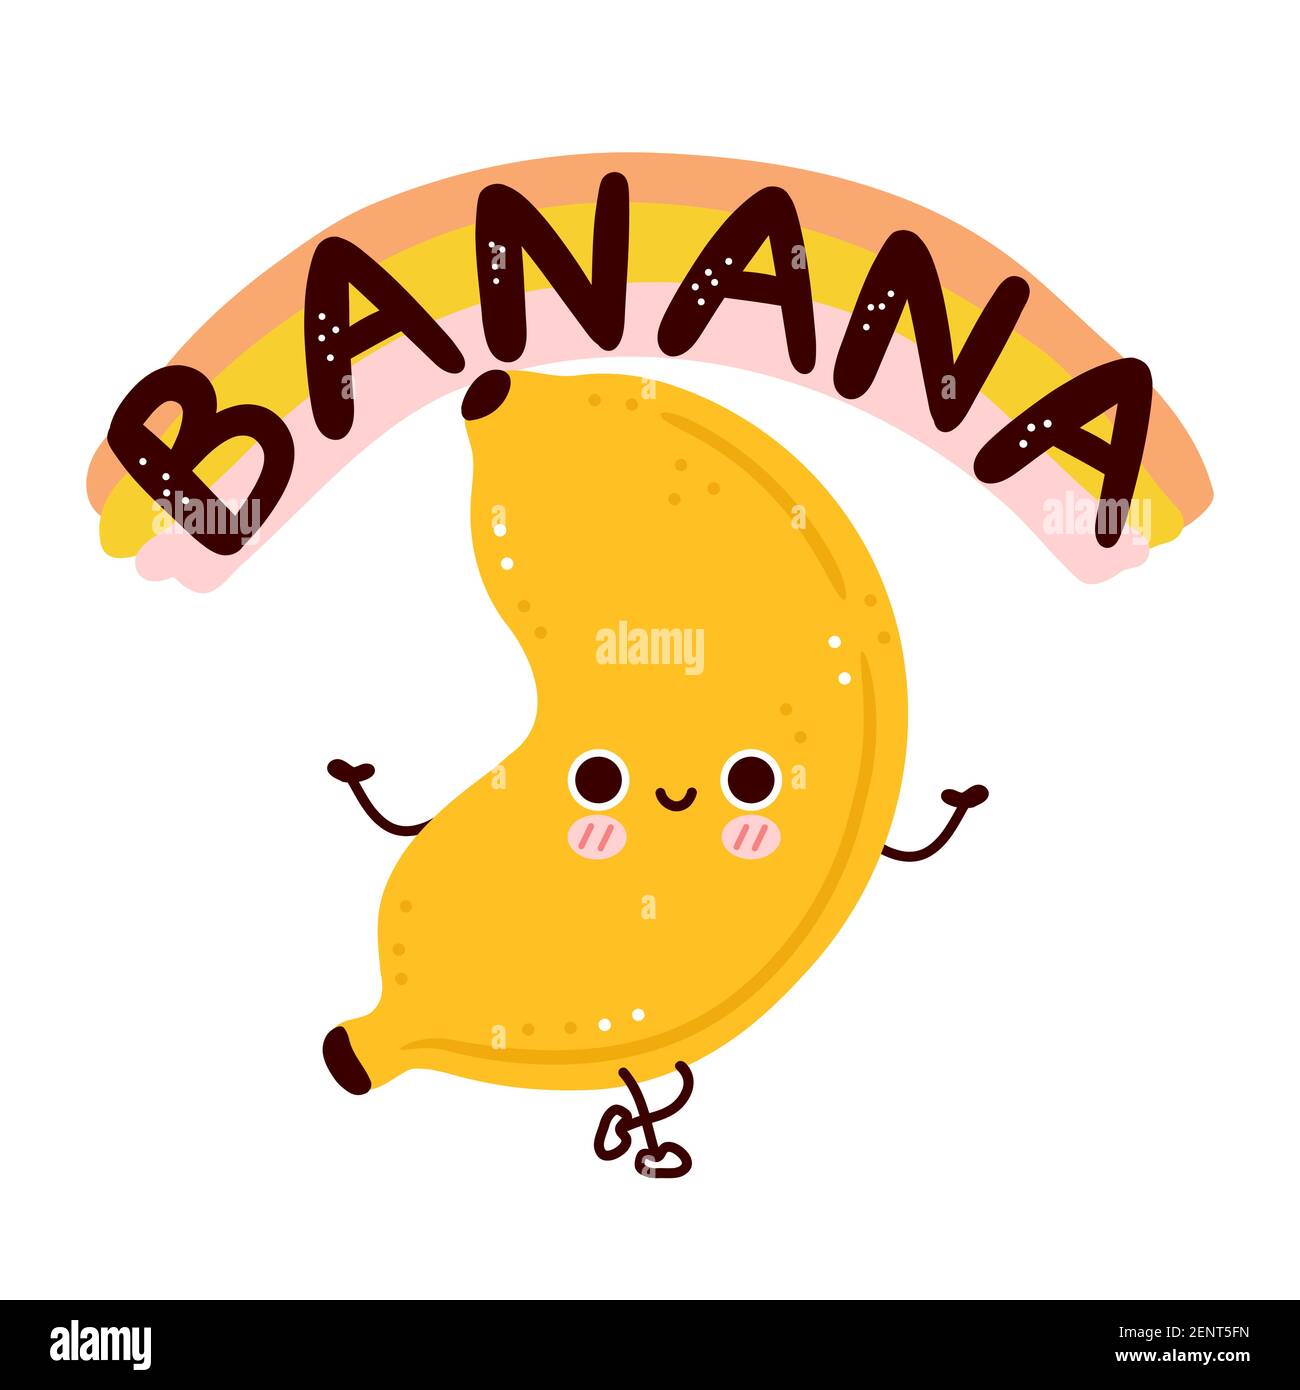 HD wallpaper yellow banana clip art with text overlay Humor Funny  communication  Wallpaper Flare